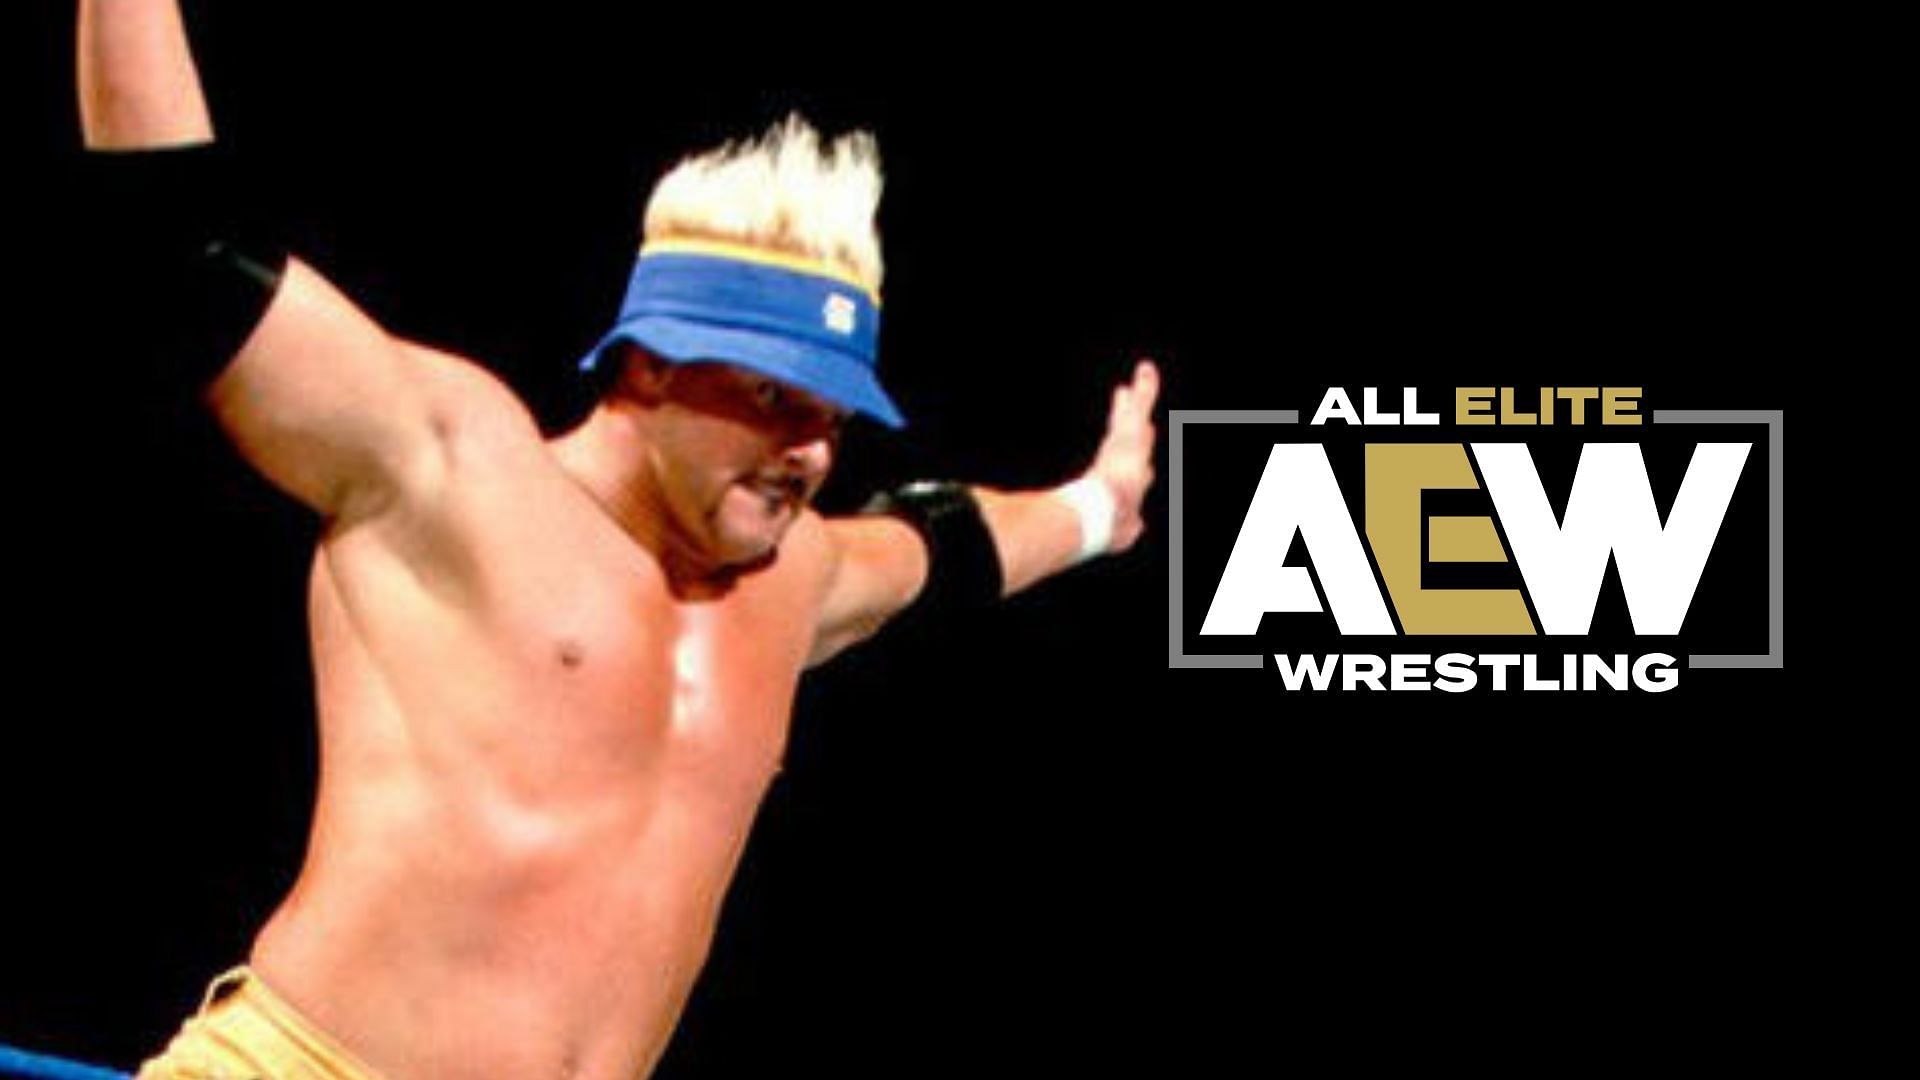 Scotty 2 Hotty (Scott Taylor) made his AEW debut last night